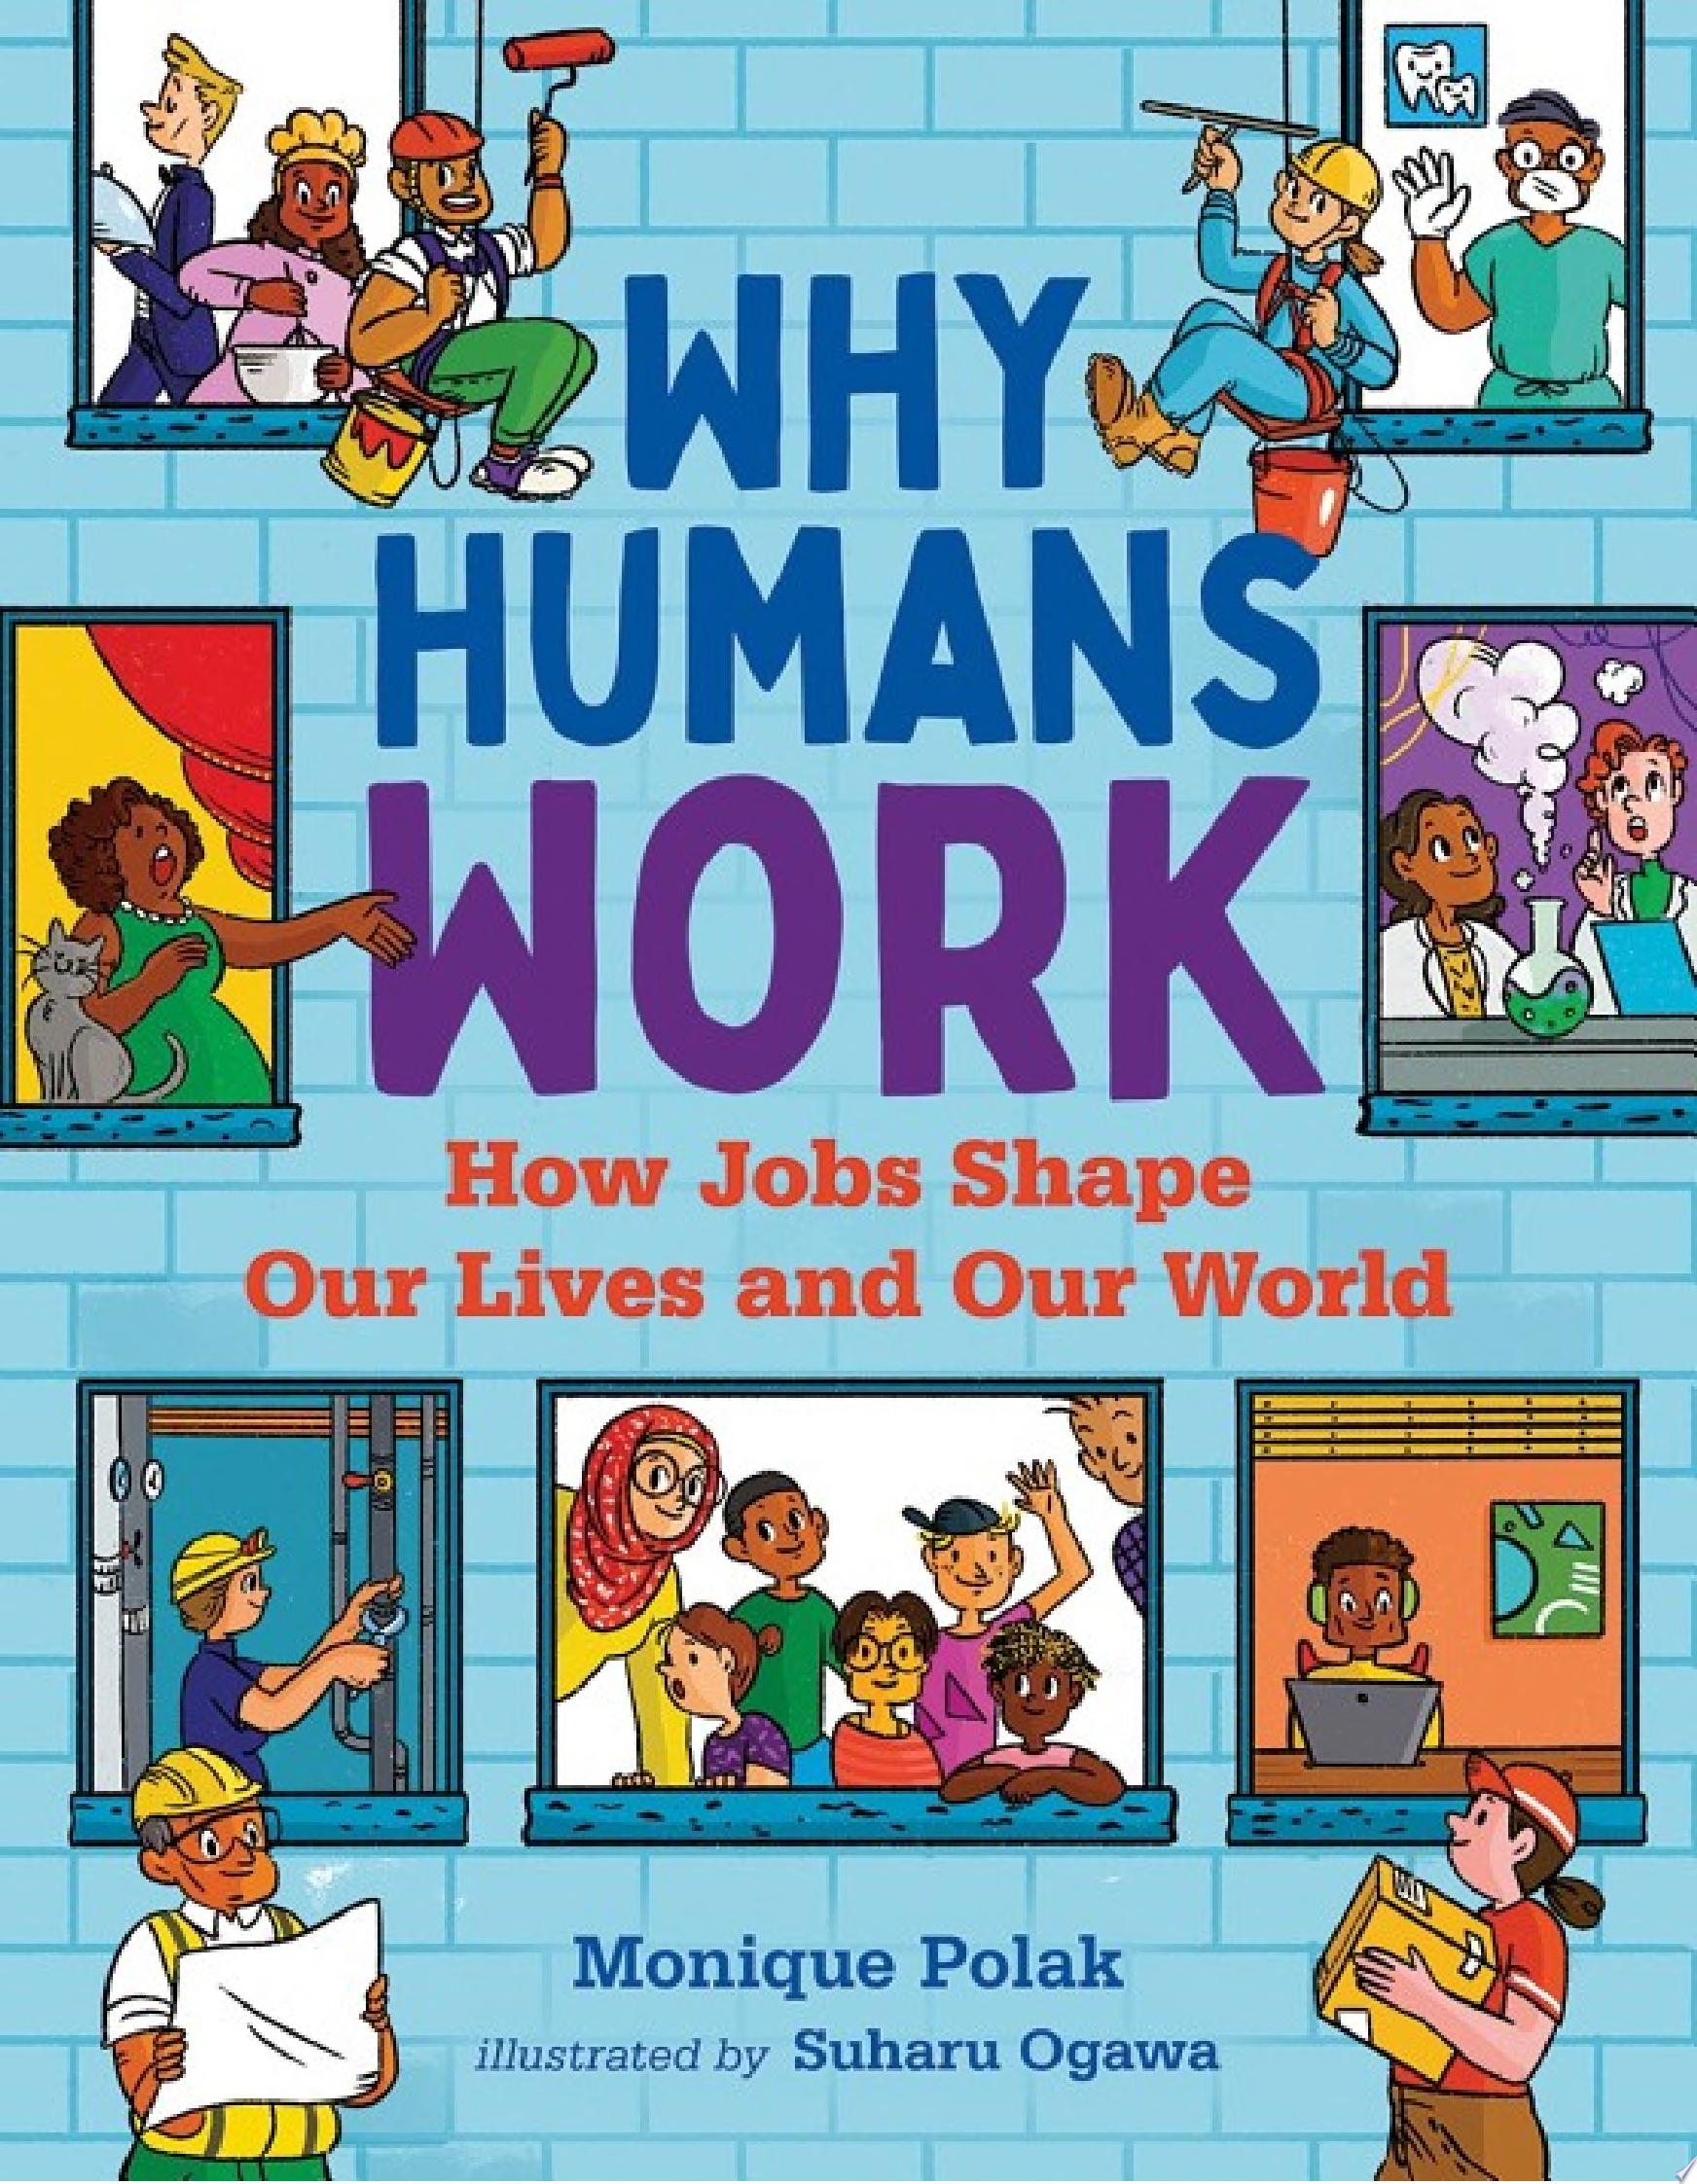 Image for "Why Humans Work"